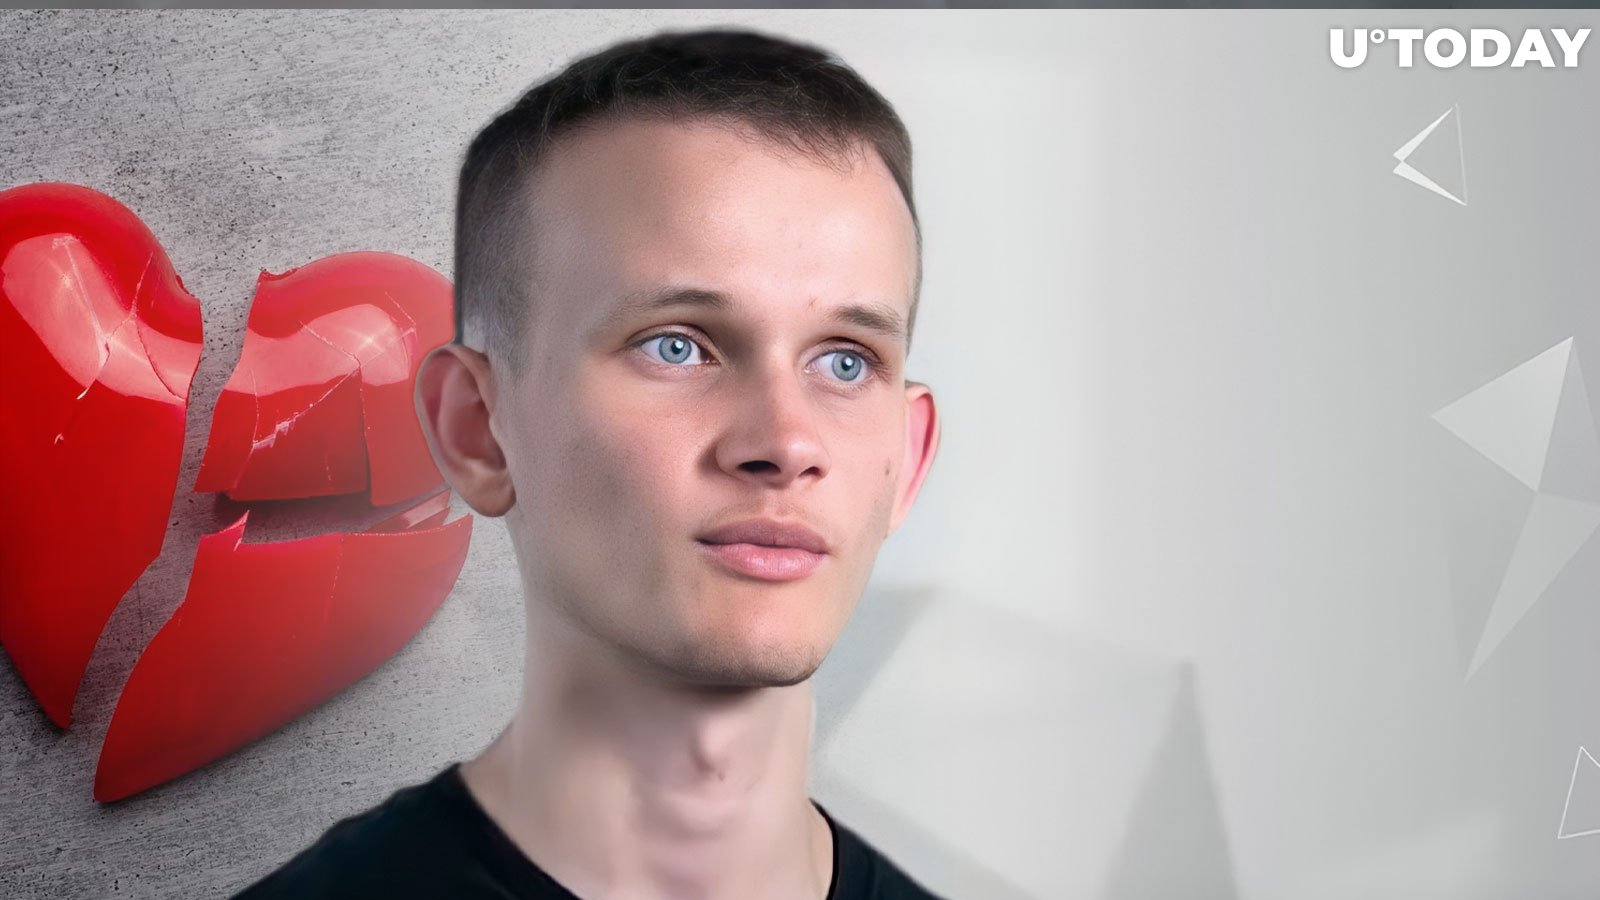 Vitalik Buterin's Breakup Caused Market Dip: Crypto Founder Justin Sun Comes Out With Crazy Proposal